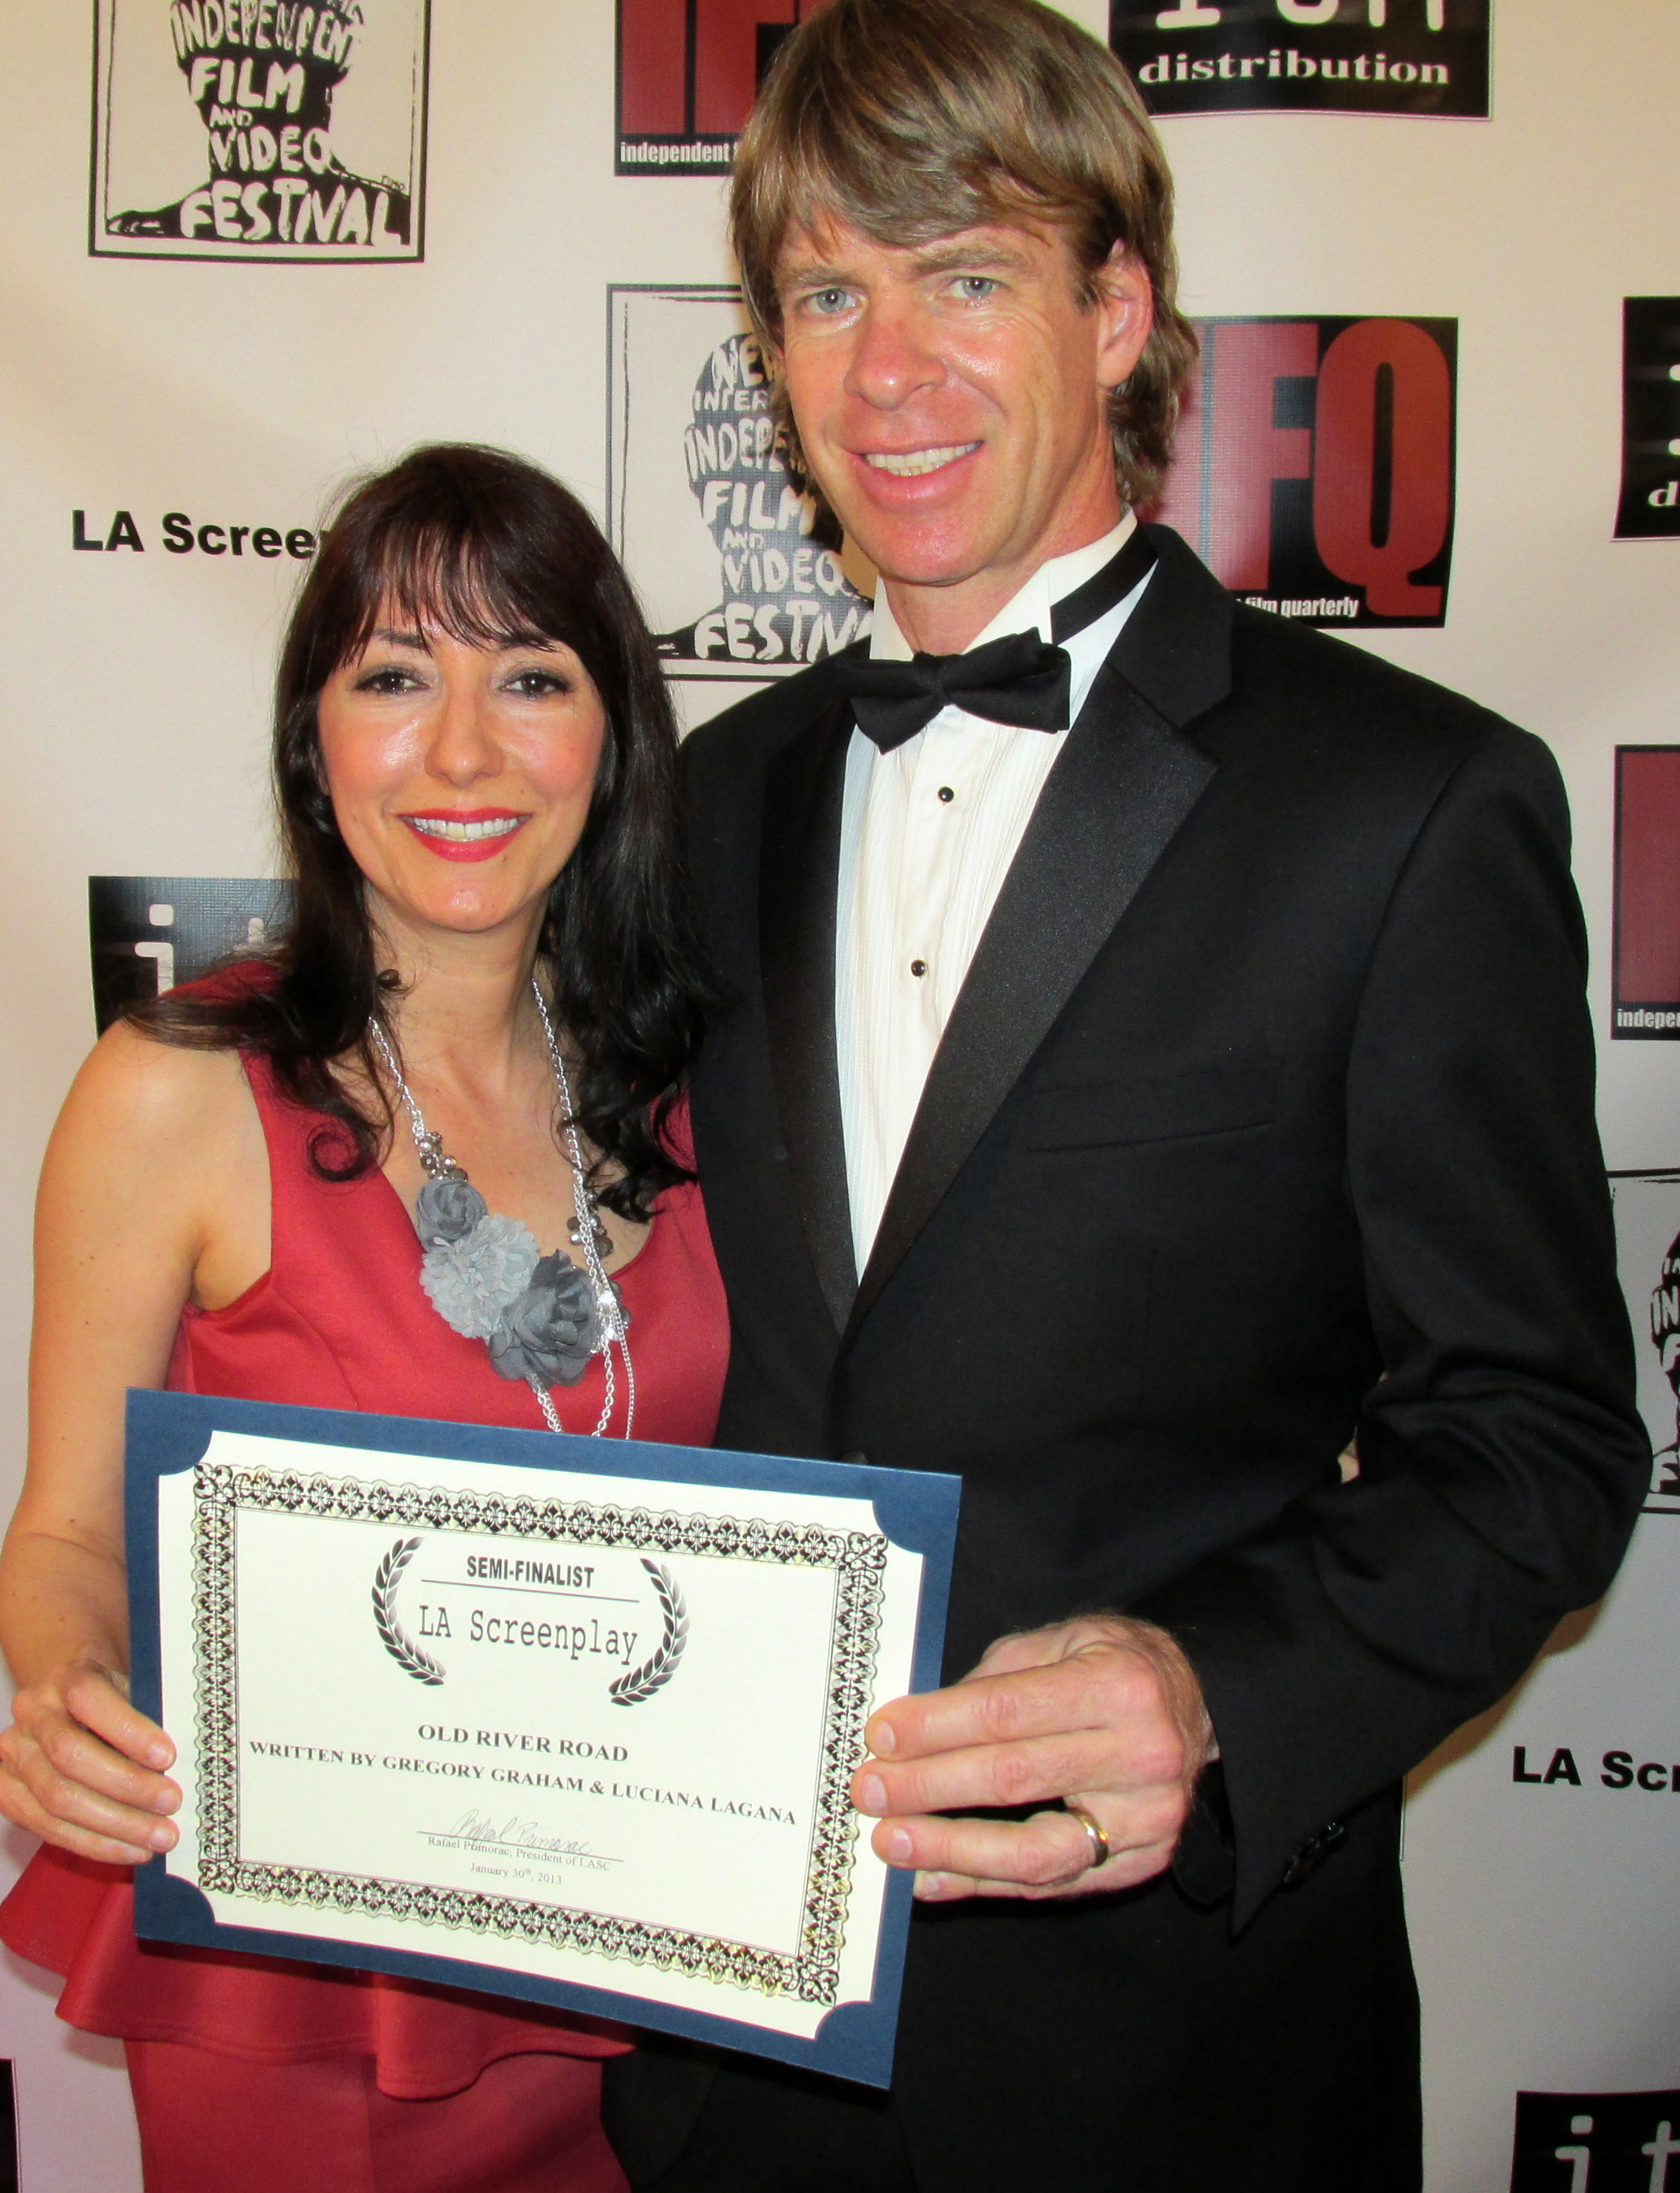 Luciana Lagana and Gregory Graham After Receiving an Award Nomination as Co-Writers of the Feature Screenplay Old River Road at the 2013 LA Screenplay Competition in Los Angeles, California